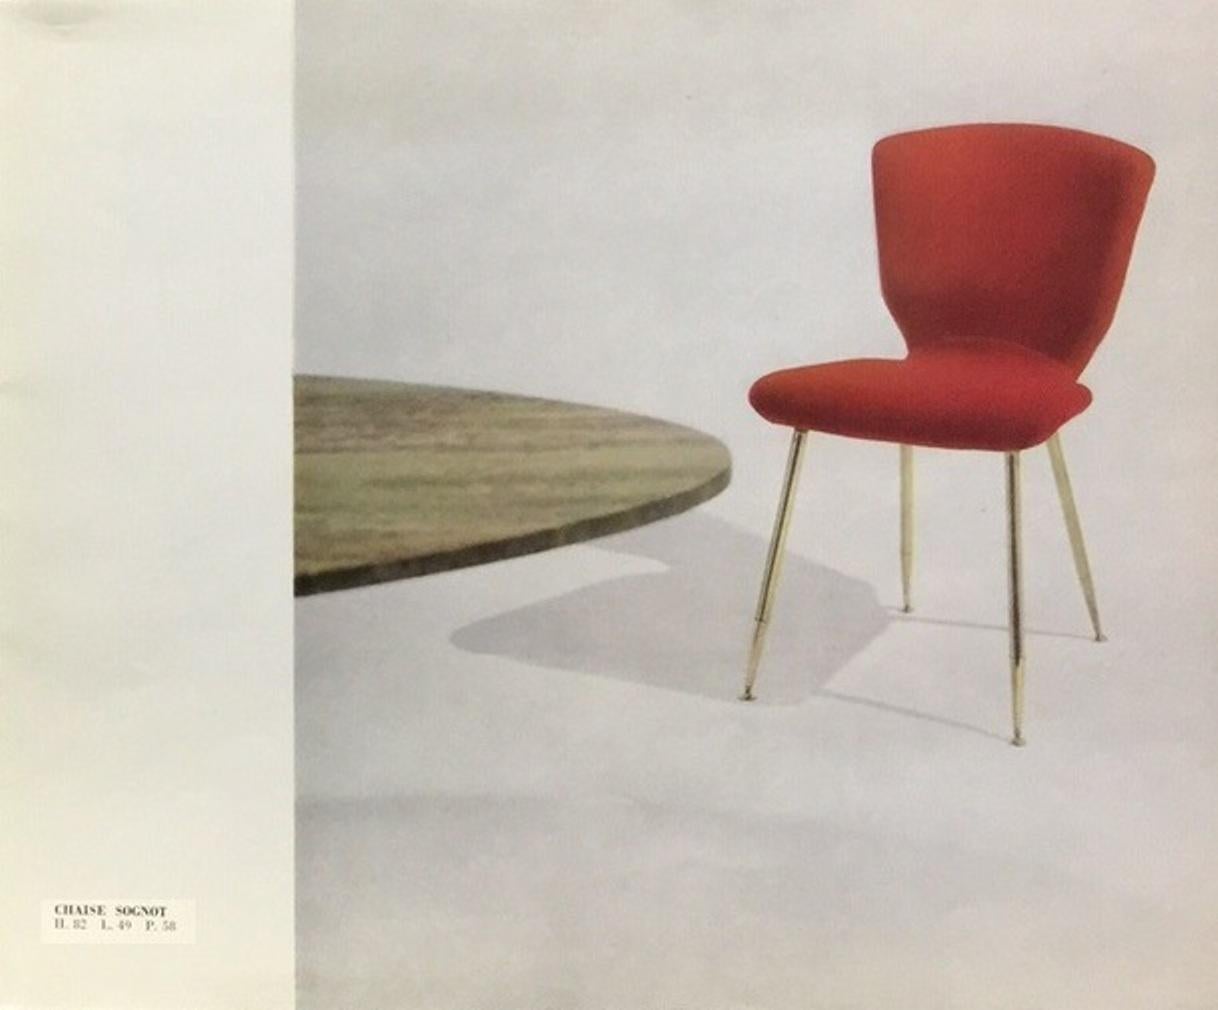 Italian 12 Brass Leg Dining Chairs by Louis Sognot for Arflex, Italy 1959, Published